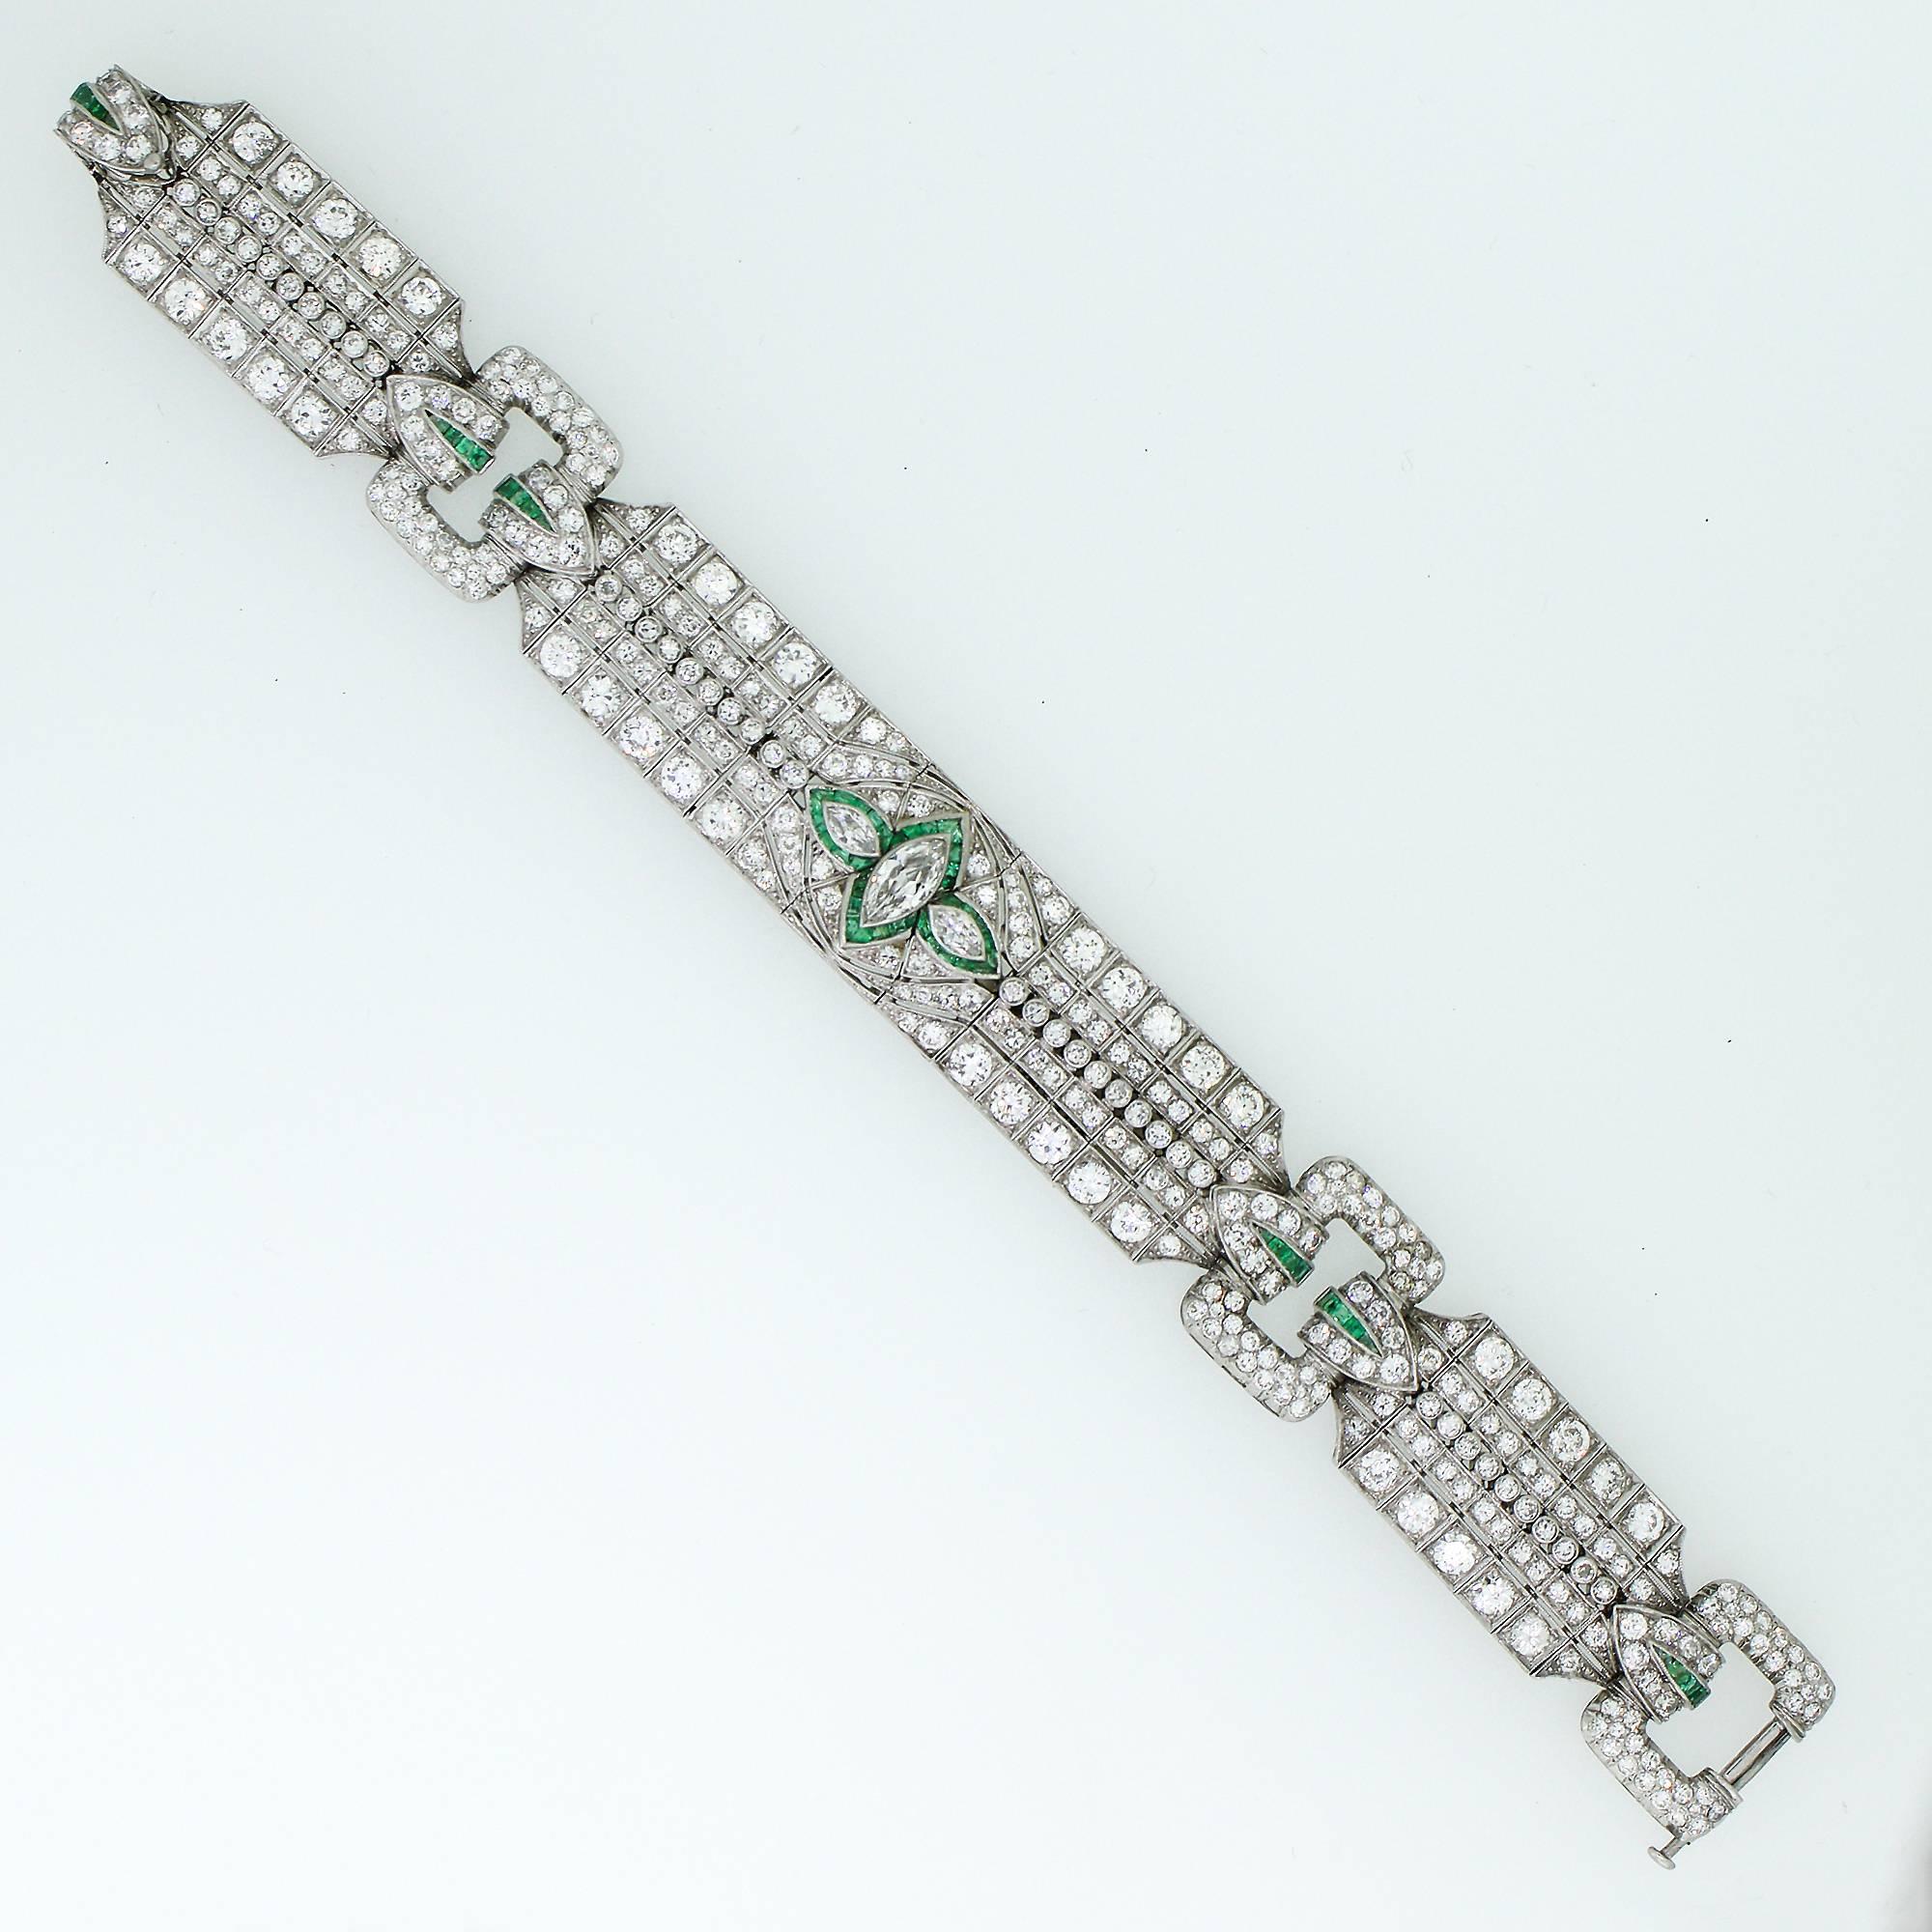 The total diamond weight of the remarkable Art Deco bracelet is estimated to be 17.30 carats with the diamonds grading as 